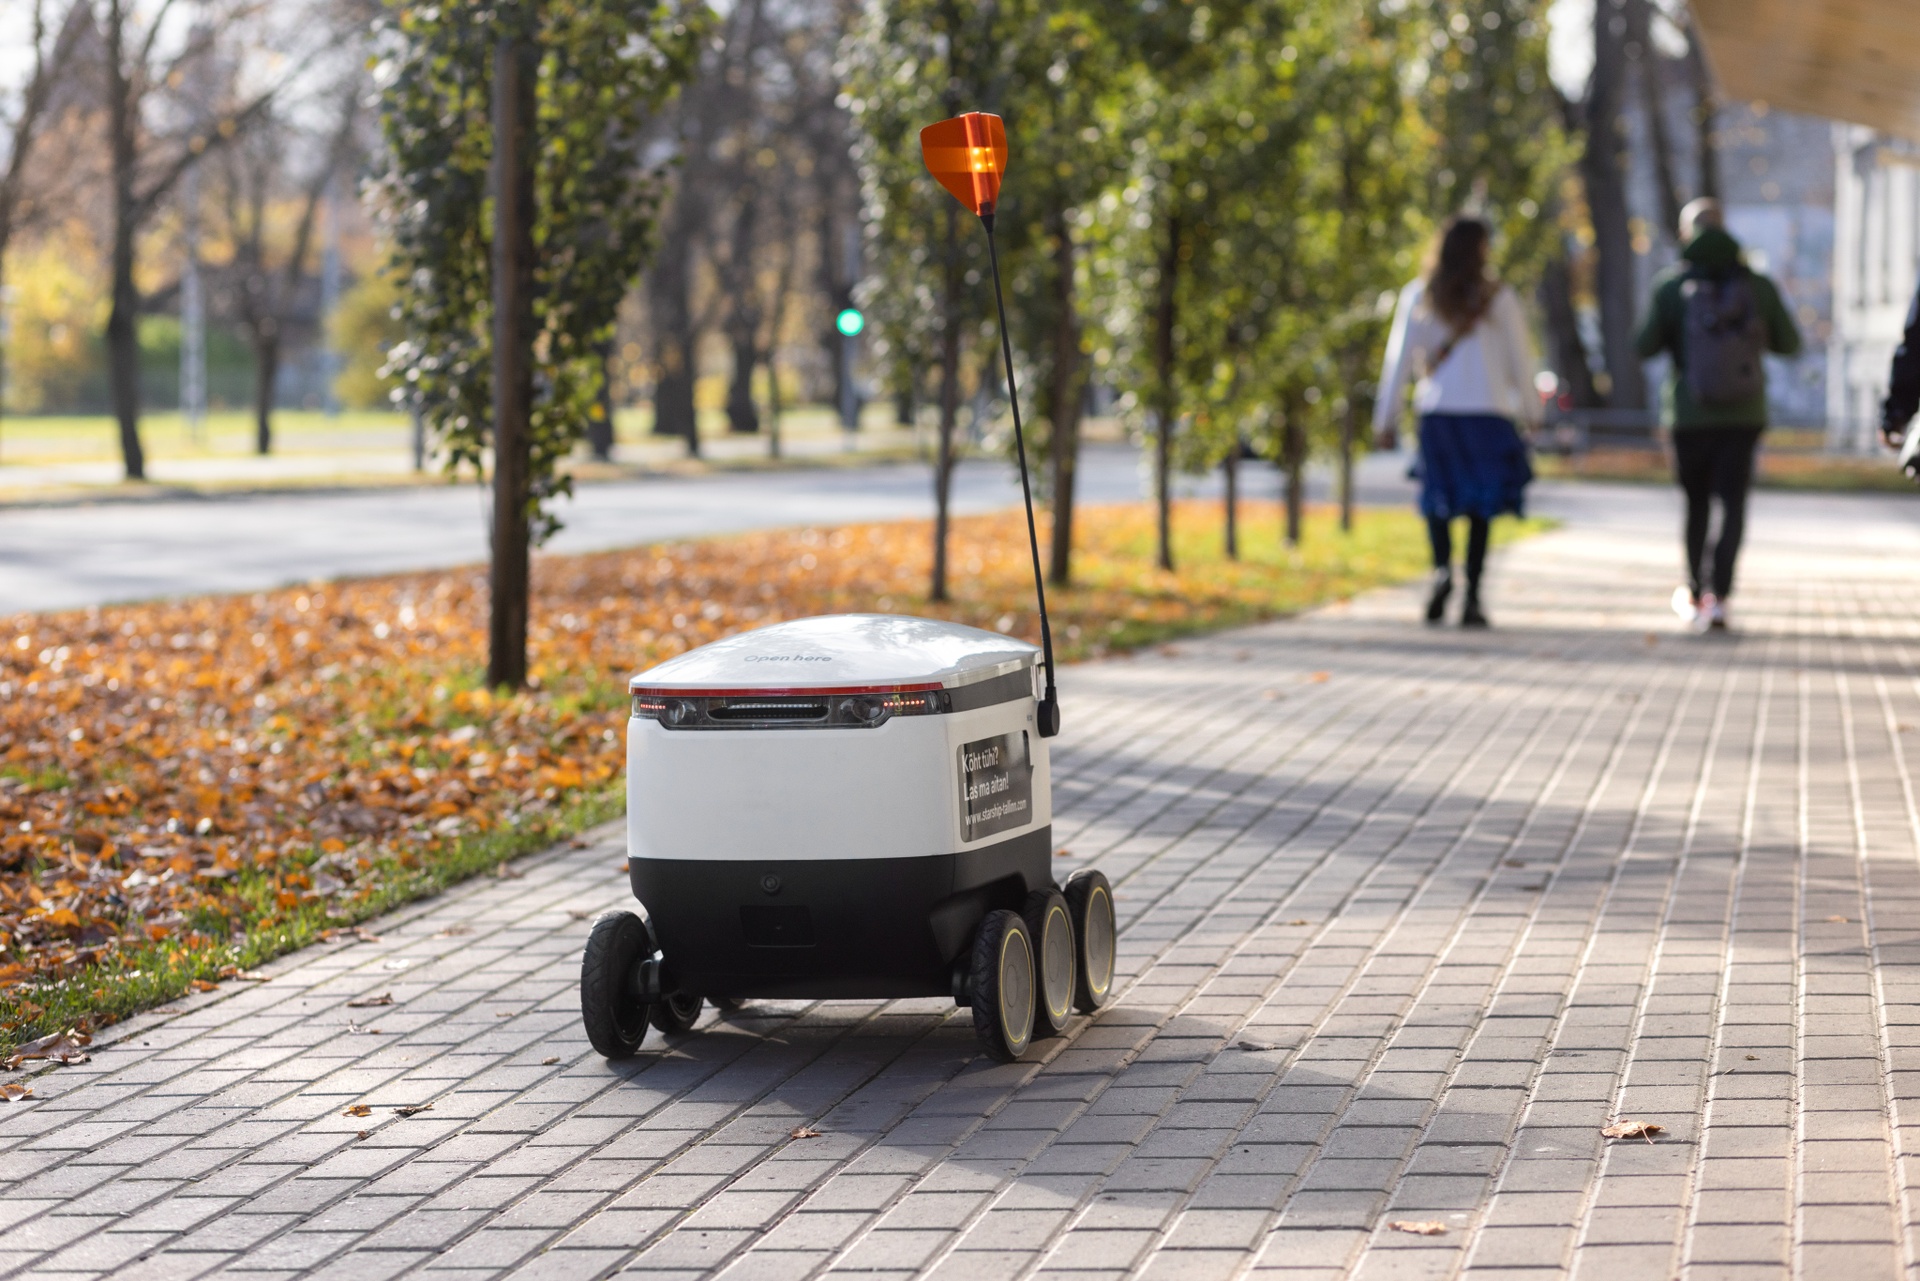 Starship robot making a delivery in Tallinn